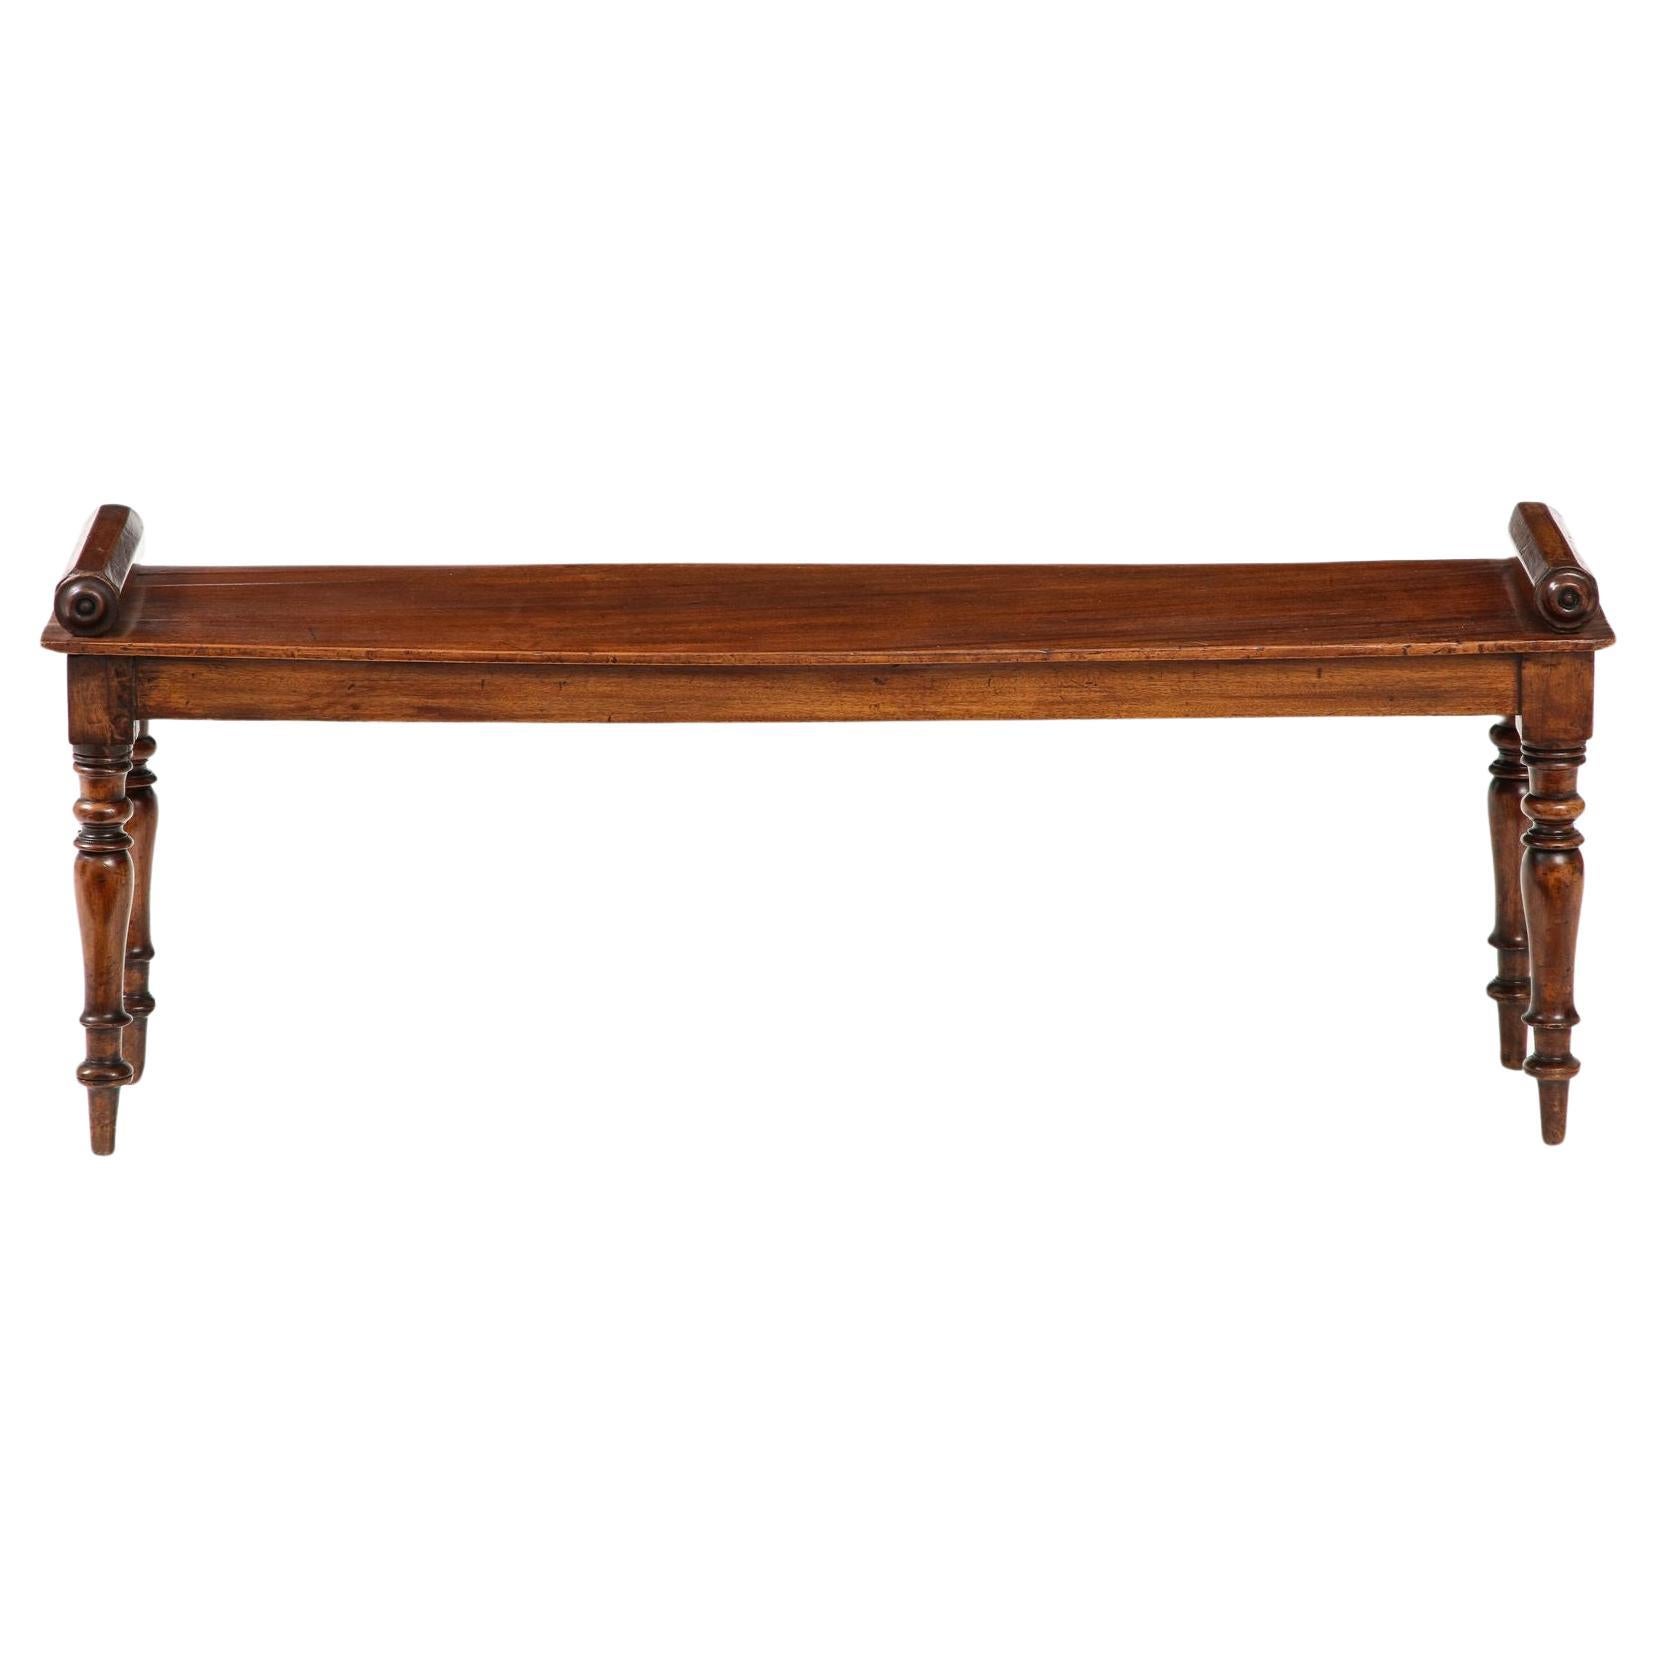 English Country House Hall Bench